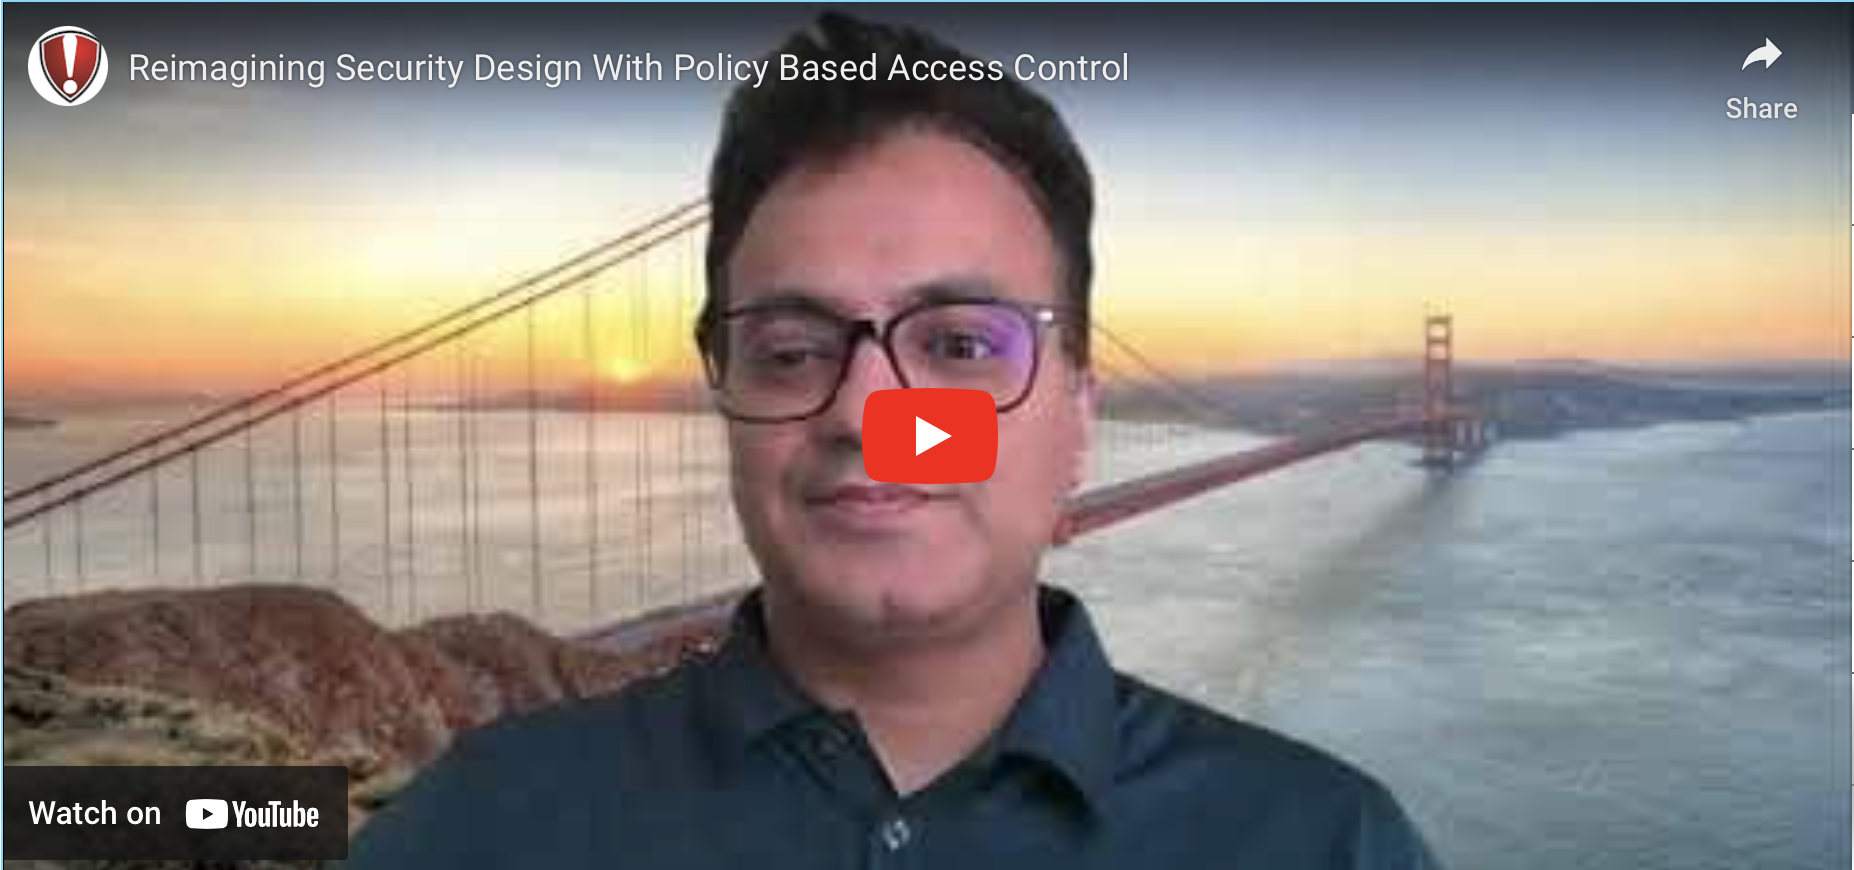 Reimagining Security Design With Policy Based Access Control